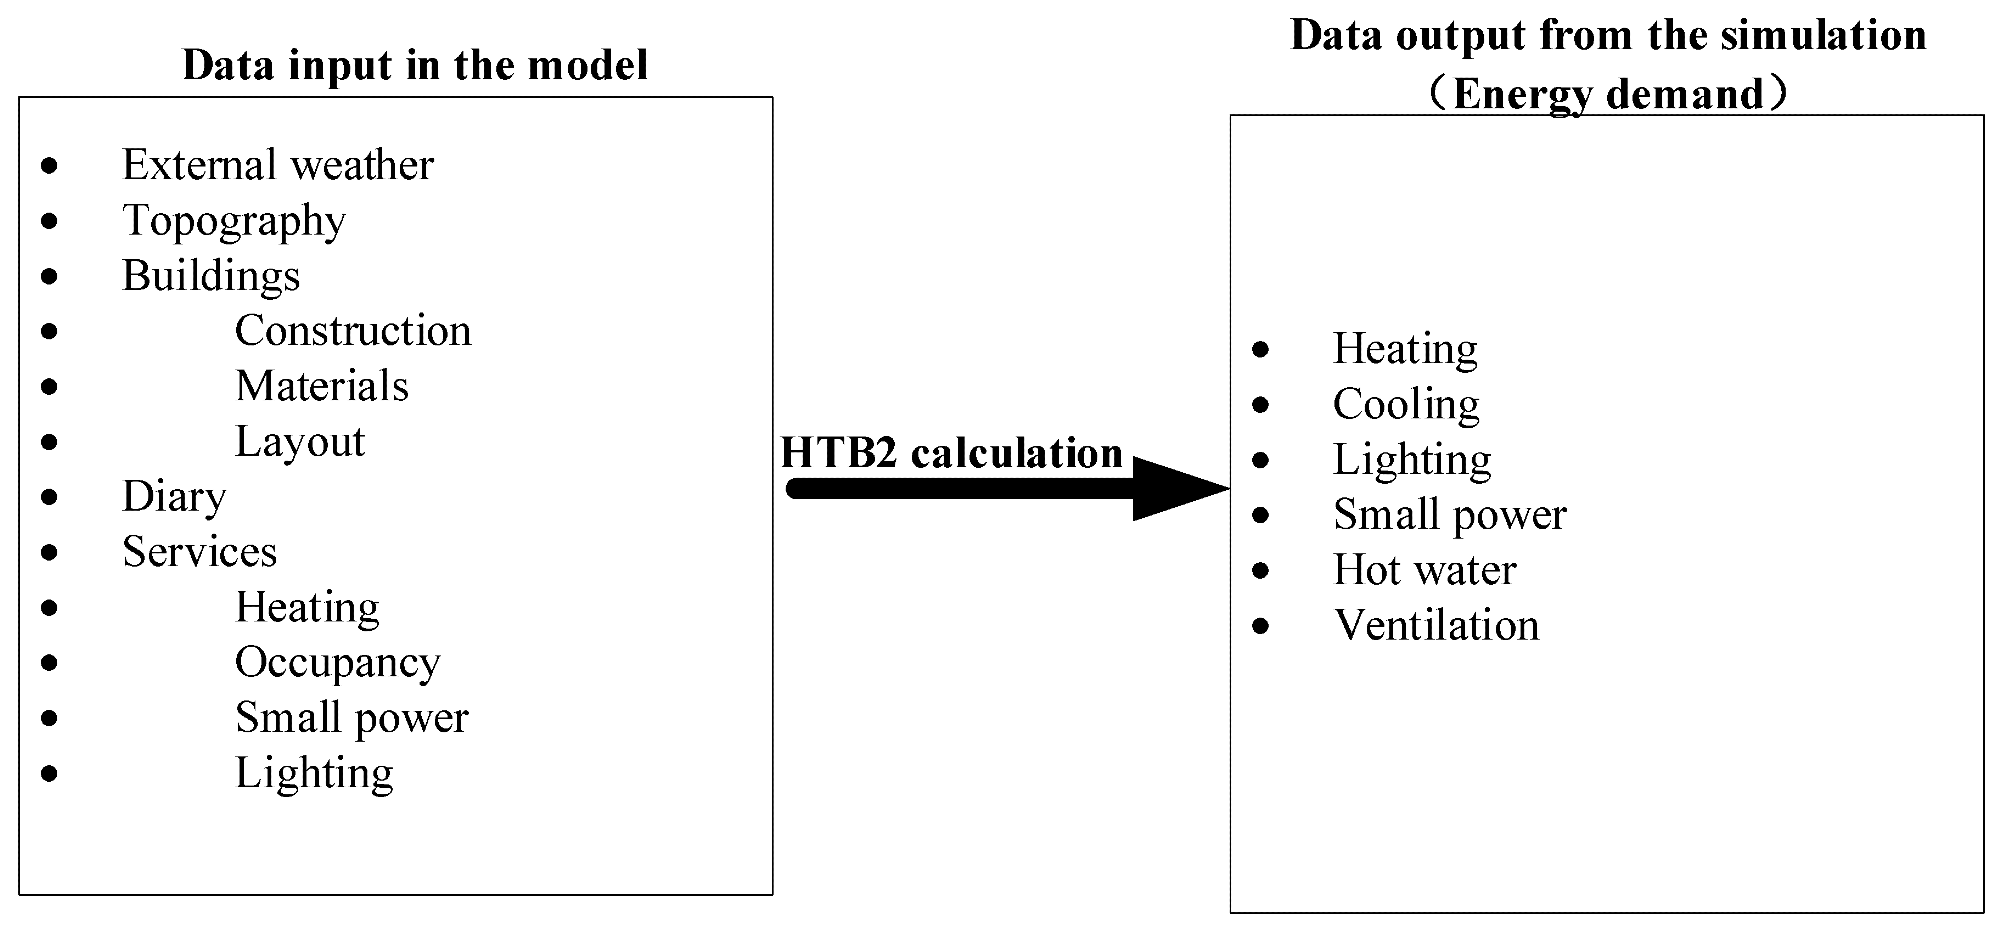 Data input to the data output of the model (HTB2 user manual 2.10).